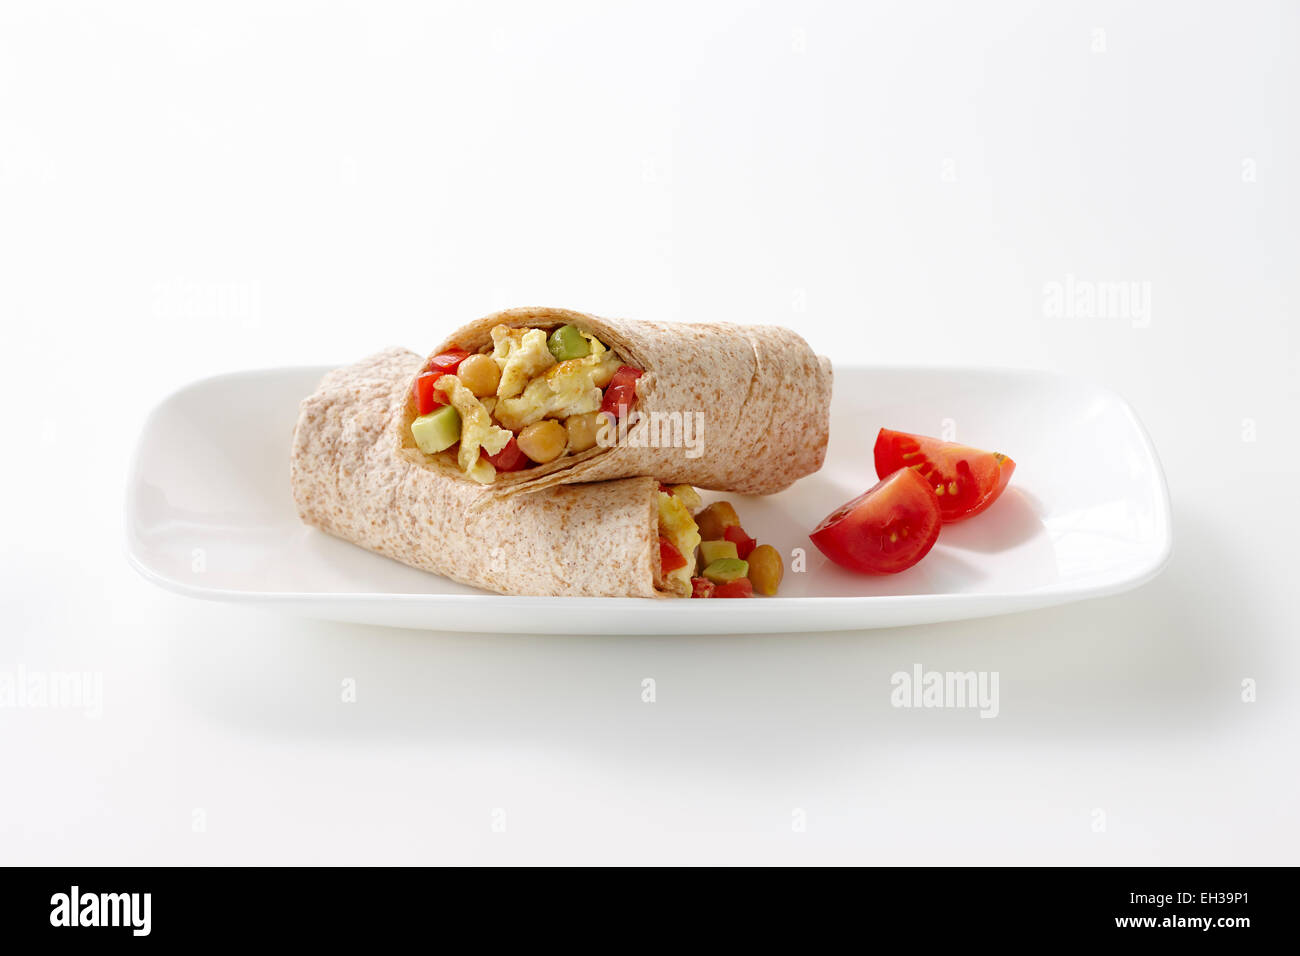 Breakfast Wrap made with Whole Wheat Tortilla filled with Egg, Chickpeas, Red Peppers and Avocado, Studio Shot Stock Photo